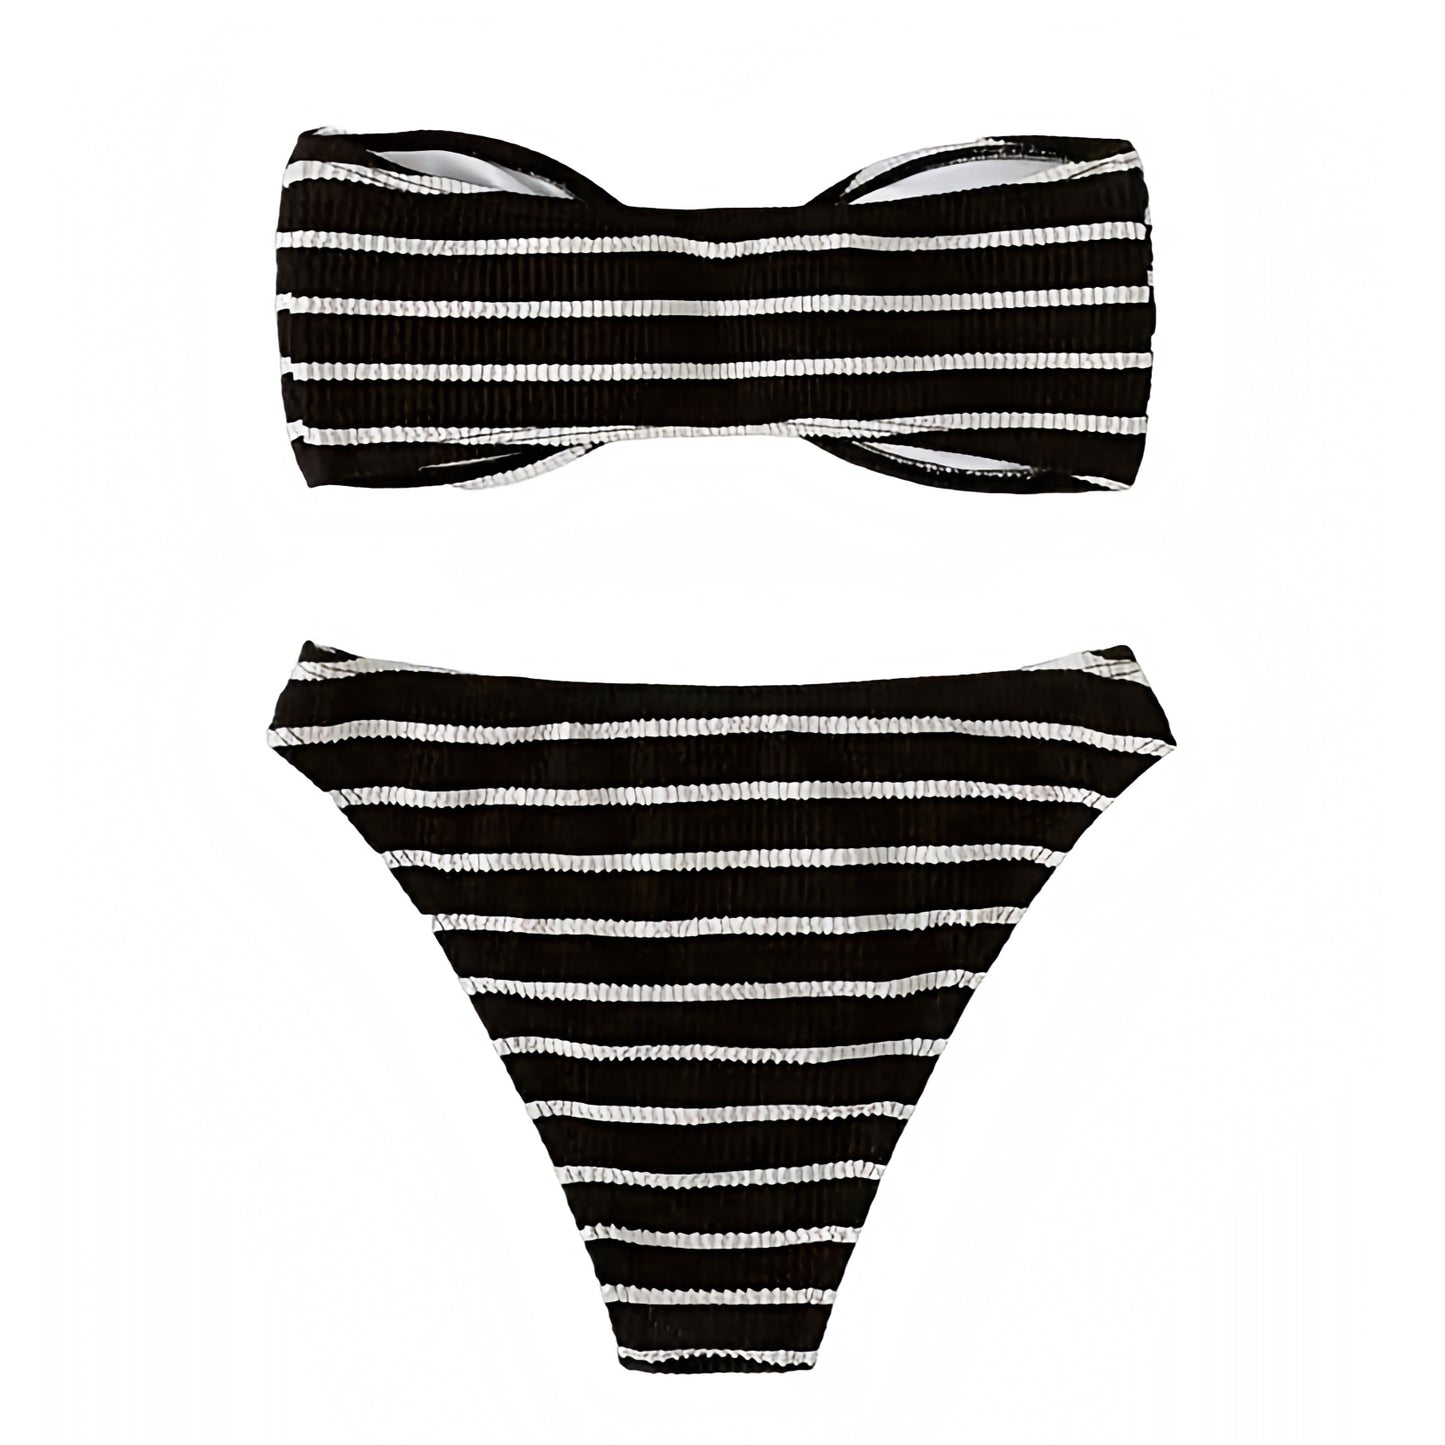 black-and-white-striped-pinstripe-contrast-patterned-bandeau-ribbed-smocked-strapless-sleeveless-push-up-sweetheart-neckline-wireless-cheeky-thong-bikini-set-two-piece-swimsuit-top-bottoms-swimwear-bathing-suit-women-ladies-chic-trendy-spring-2024-summer-elegant-casual-classy-feminine-preppy-style-european-vacation-beach-wear-same-revolve-pacsun-frankies-blackbough